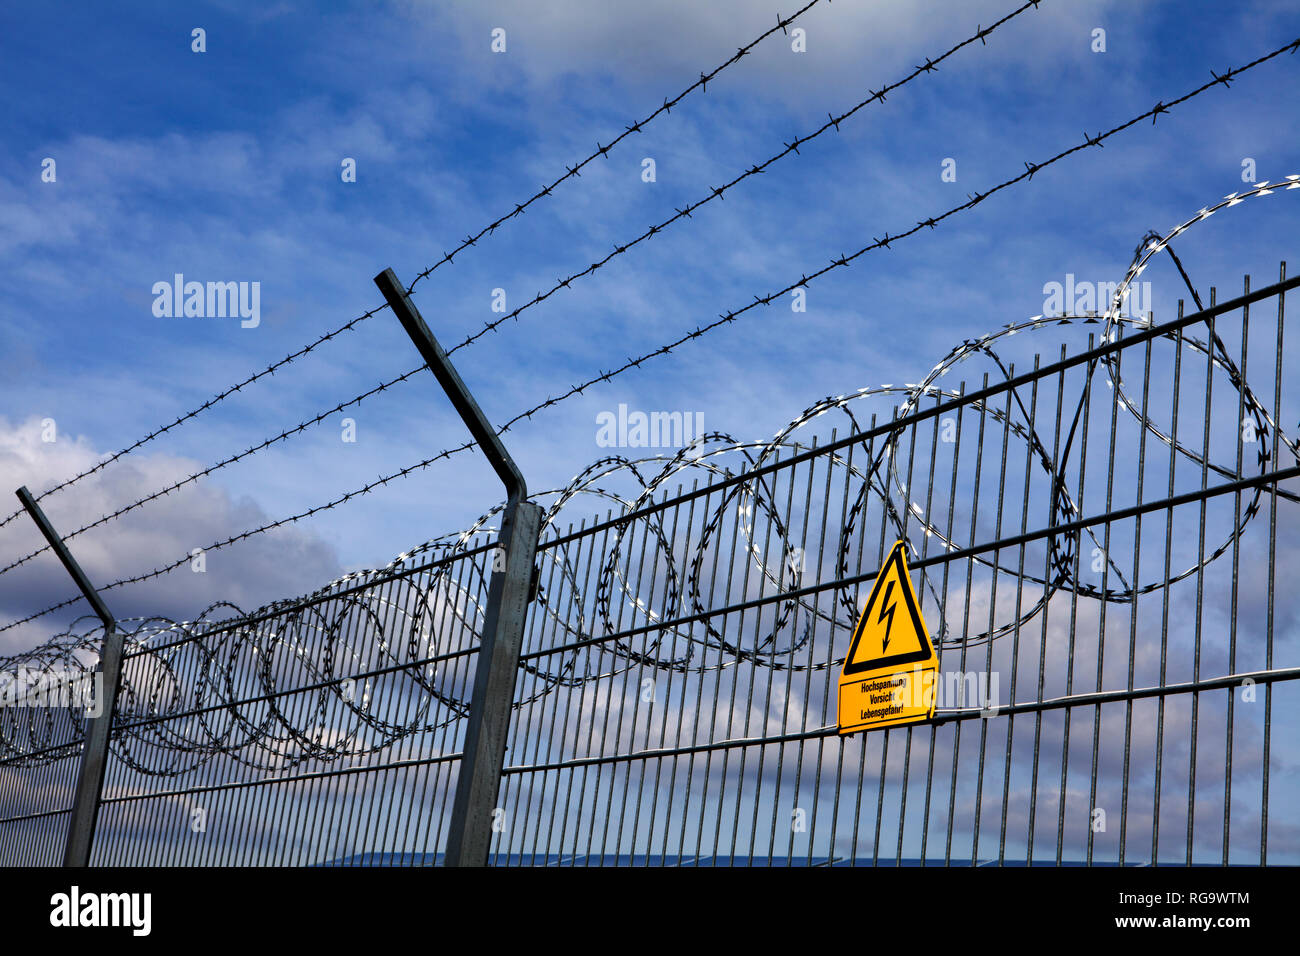 Signpost  and fence at an open space solar photovoltaic plant, Germany, Europe Stock Photo